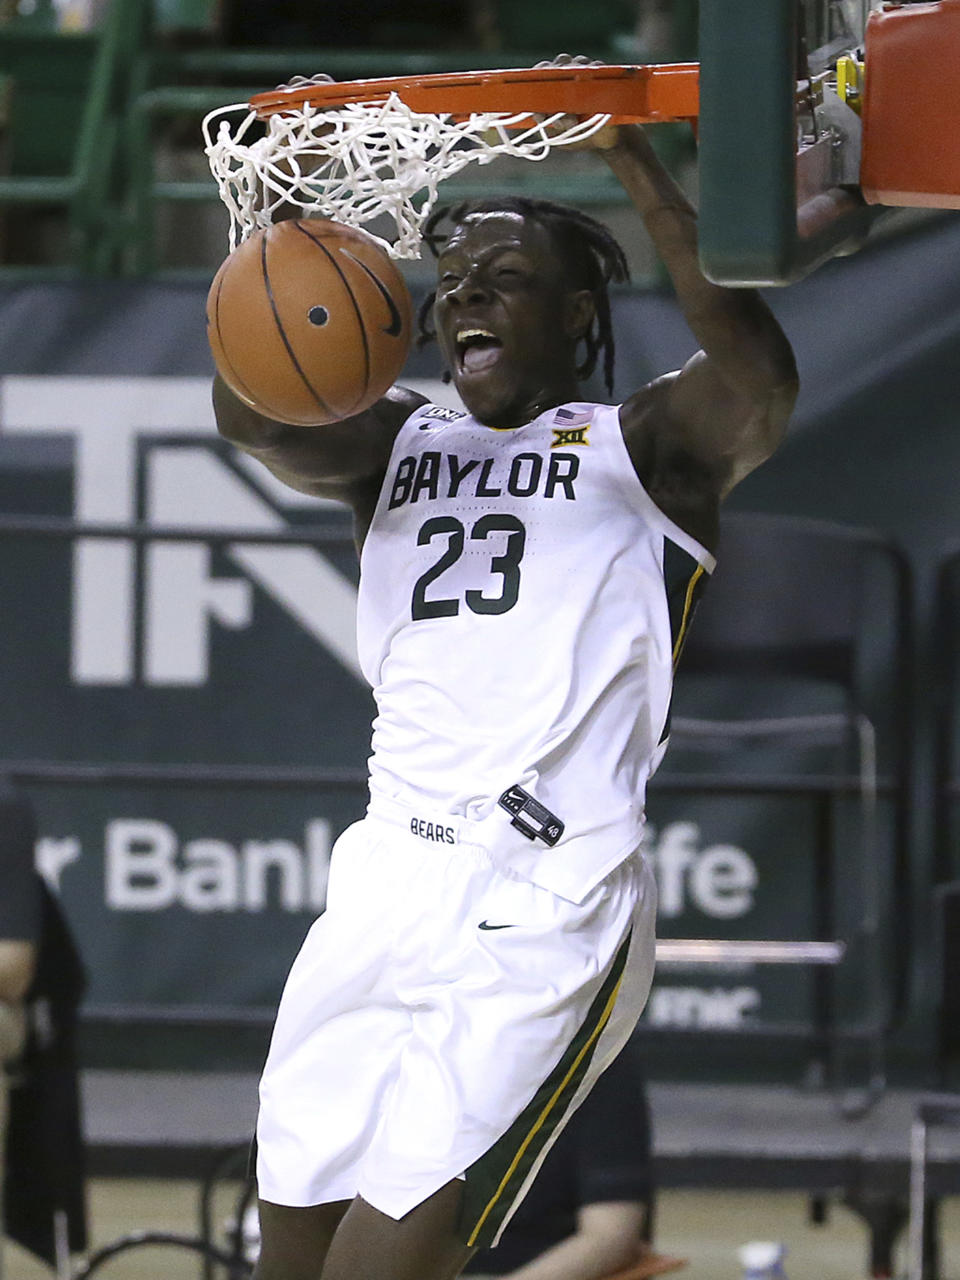 FILE - In this file photo dated Tuesday, Dec. 29, 2020, Baylor forward Jonathan Tchamwa Tchatchoua (23) dunks the ball against Central Arkansas in the first half of an NCAA college basketball game, in Waco, Texas, USA. The NBA's global academy system is beginning to produce high-level collegiate players, as the upcoming NCAA Tournament will include eight NBA Academy alumni. (AP Photo/ Jerry Larson, FILE)